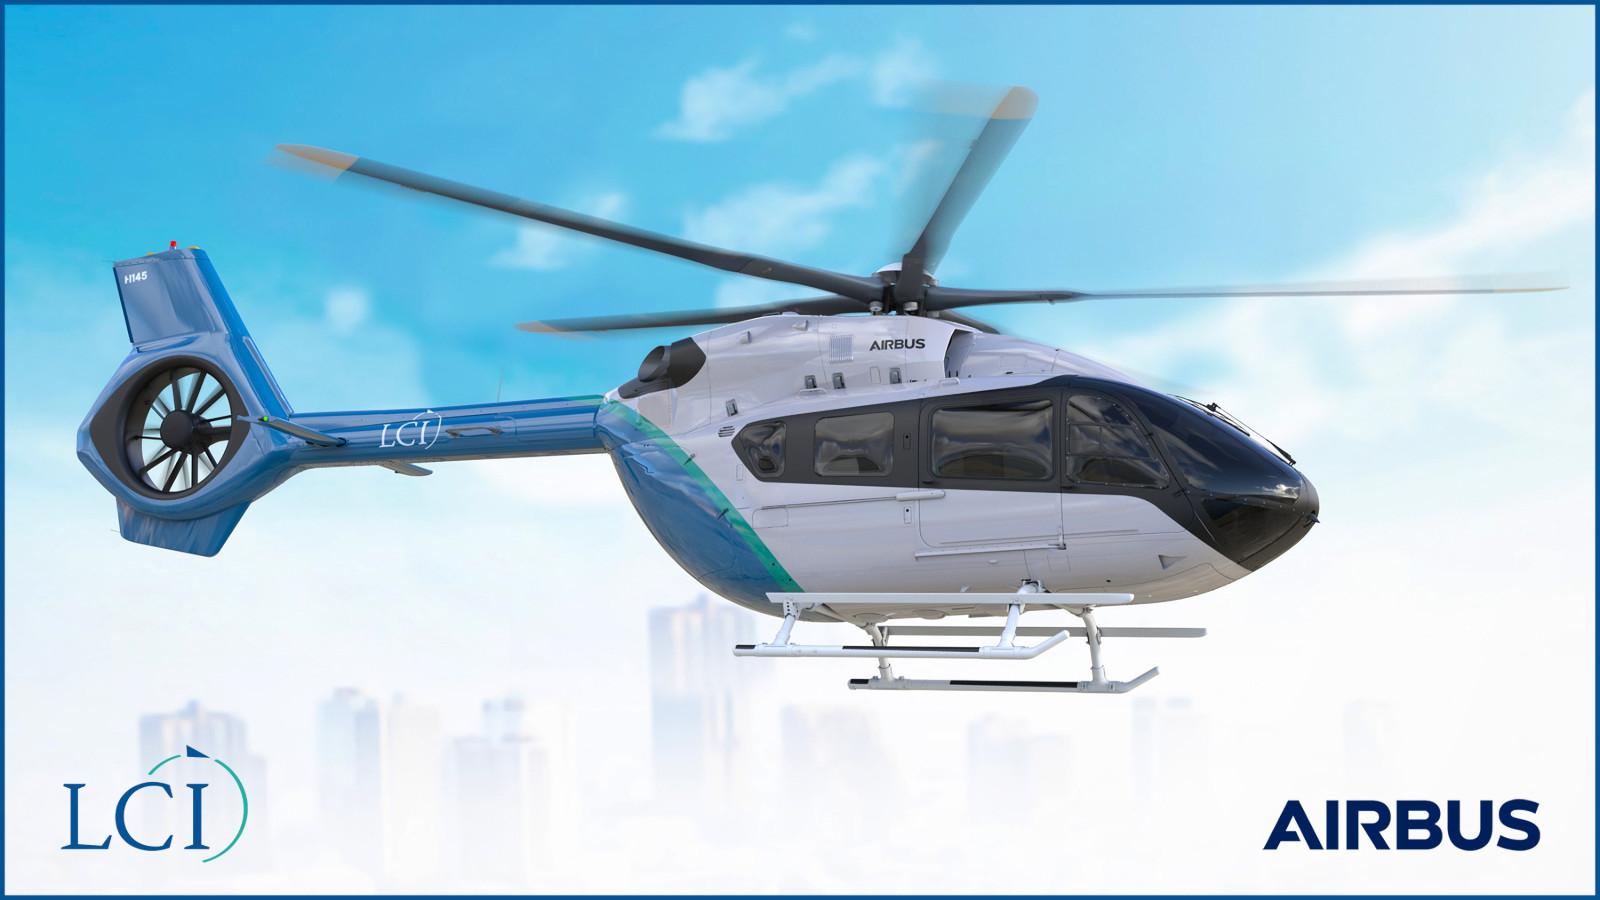 Airbus Helicopters, LCI Unveil Flight Path Partnership